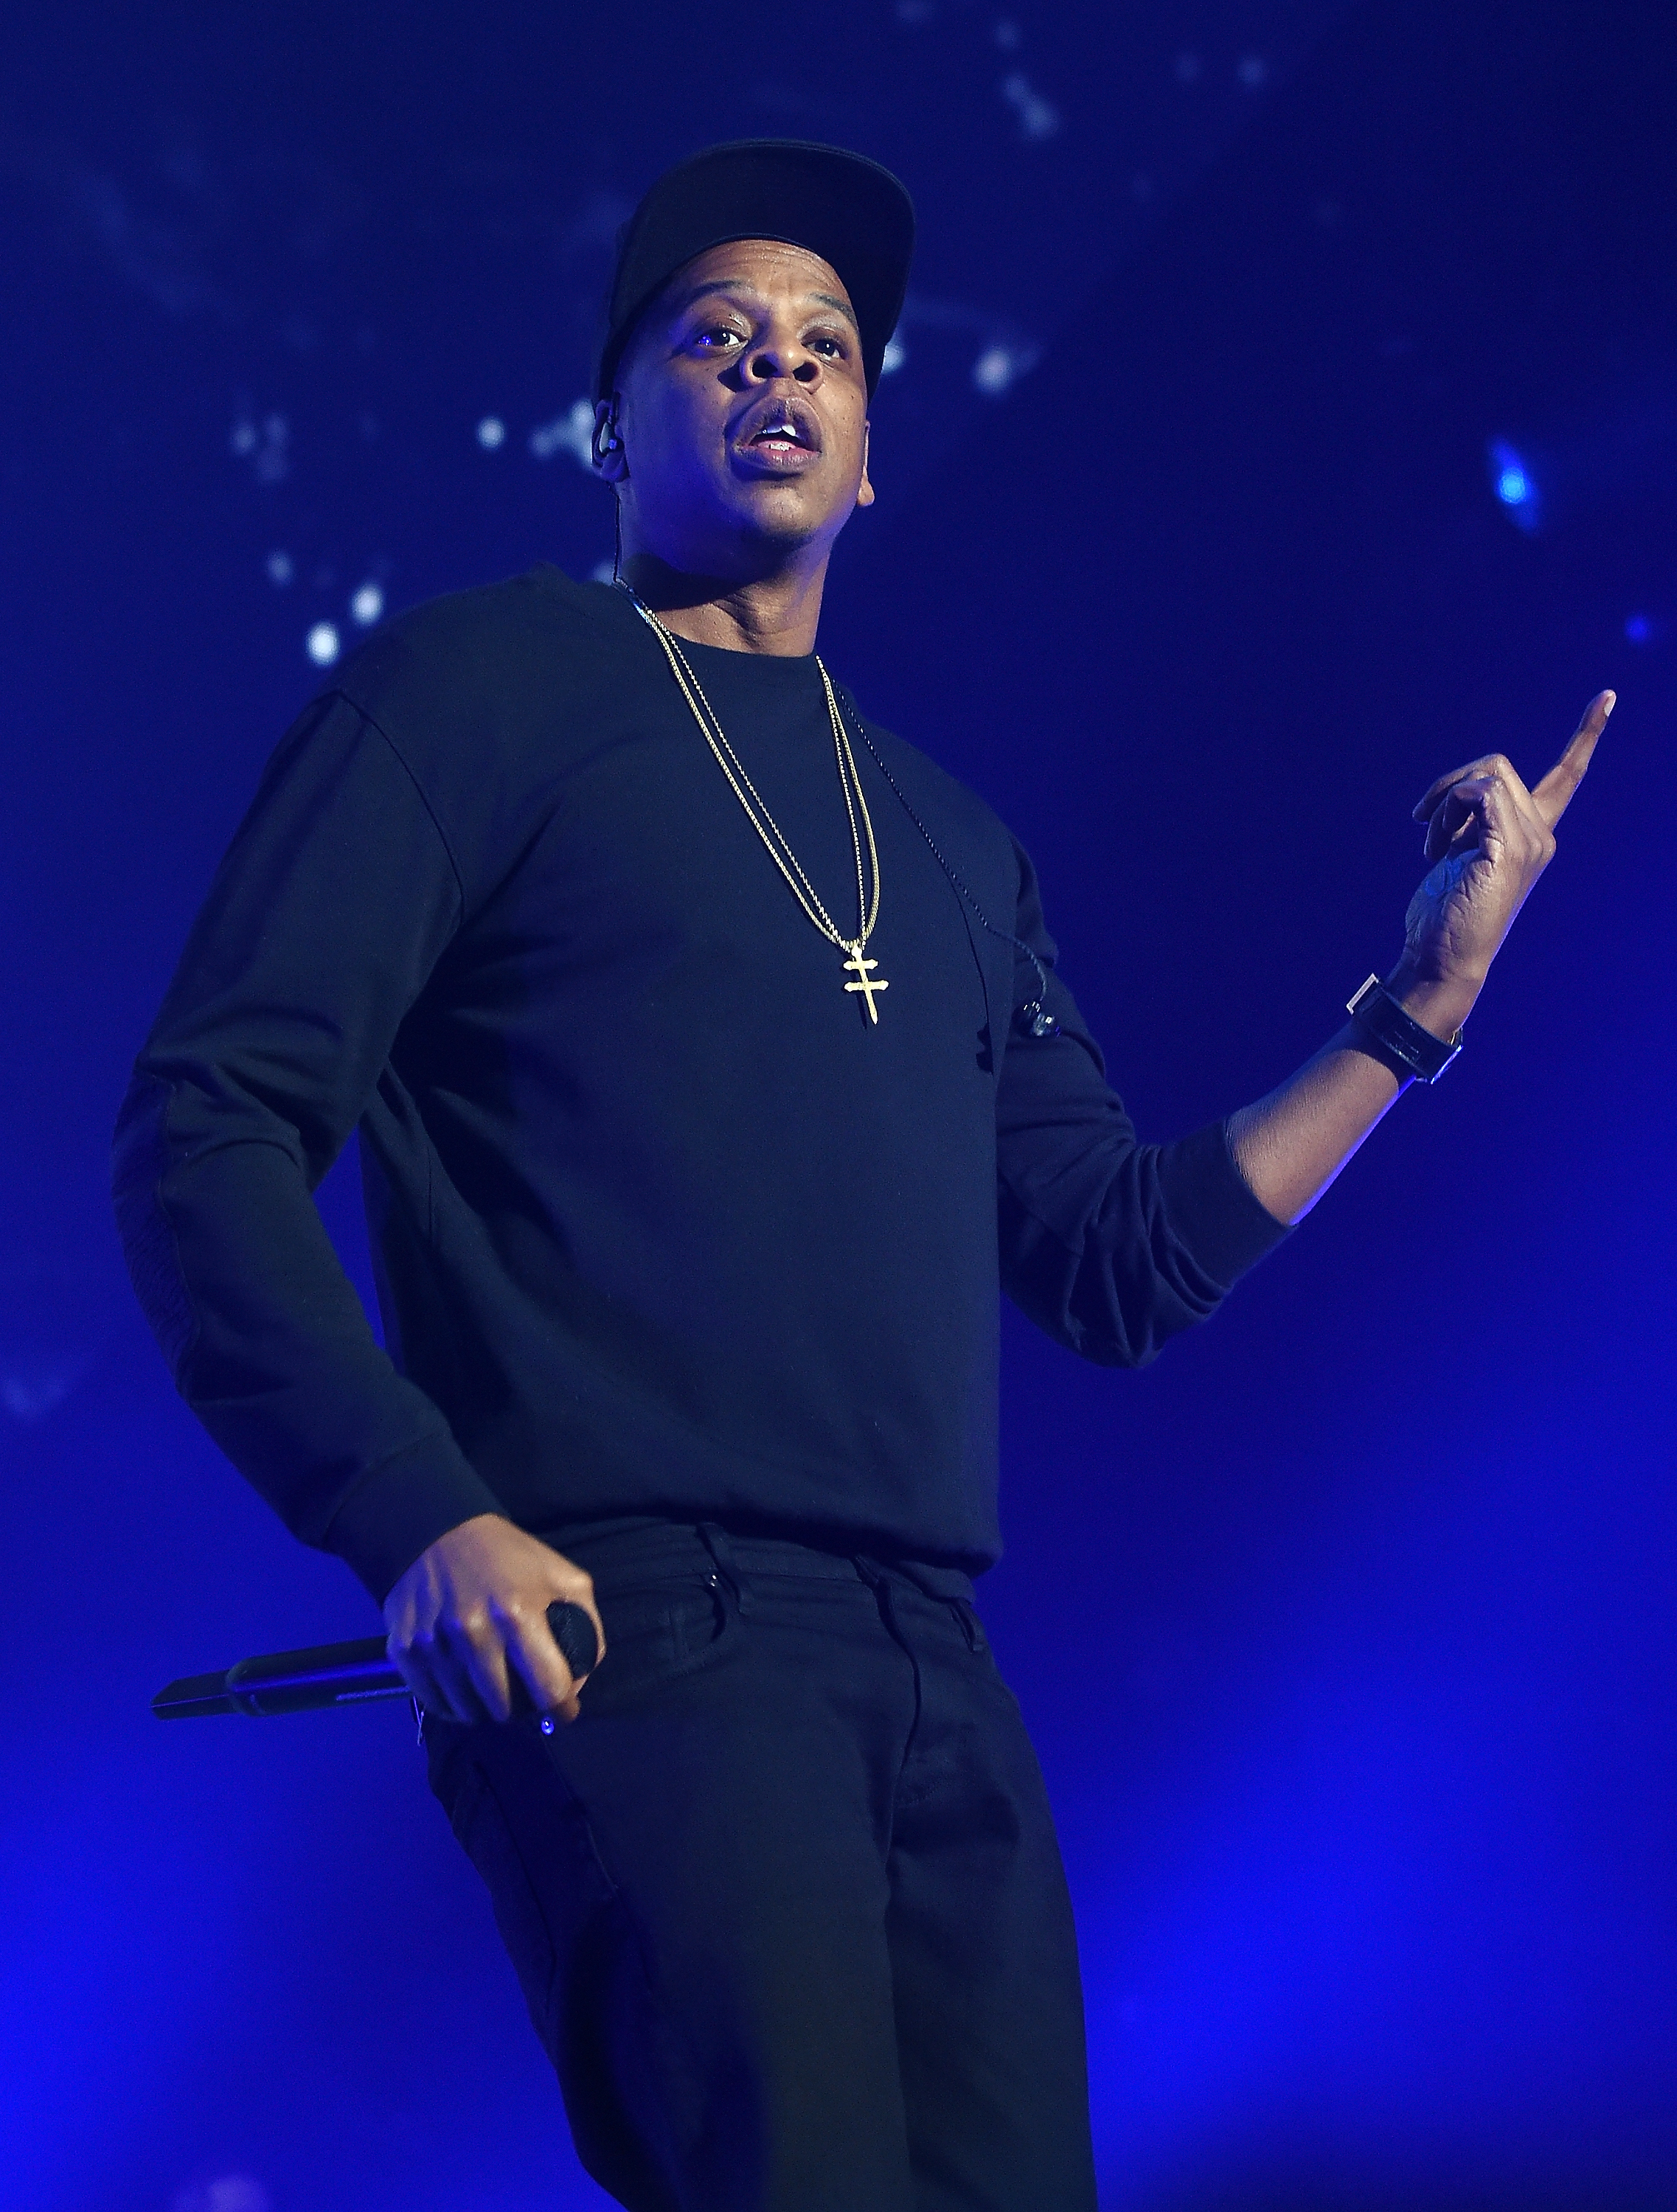 Jay-Z performs onstage during TIDAL X: 1020 Amplified by HTC in New York City on Oct. 20, 2015.